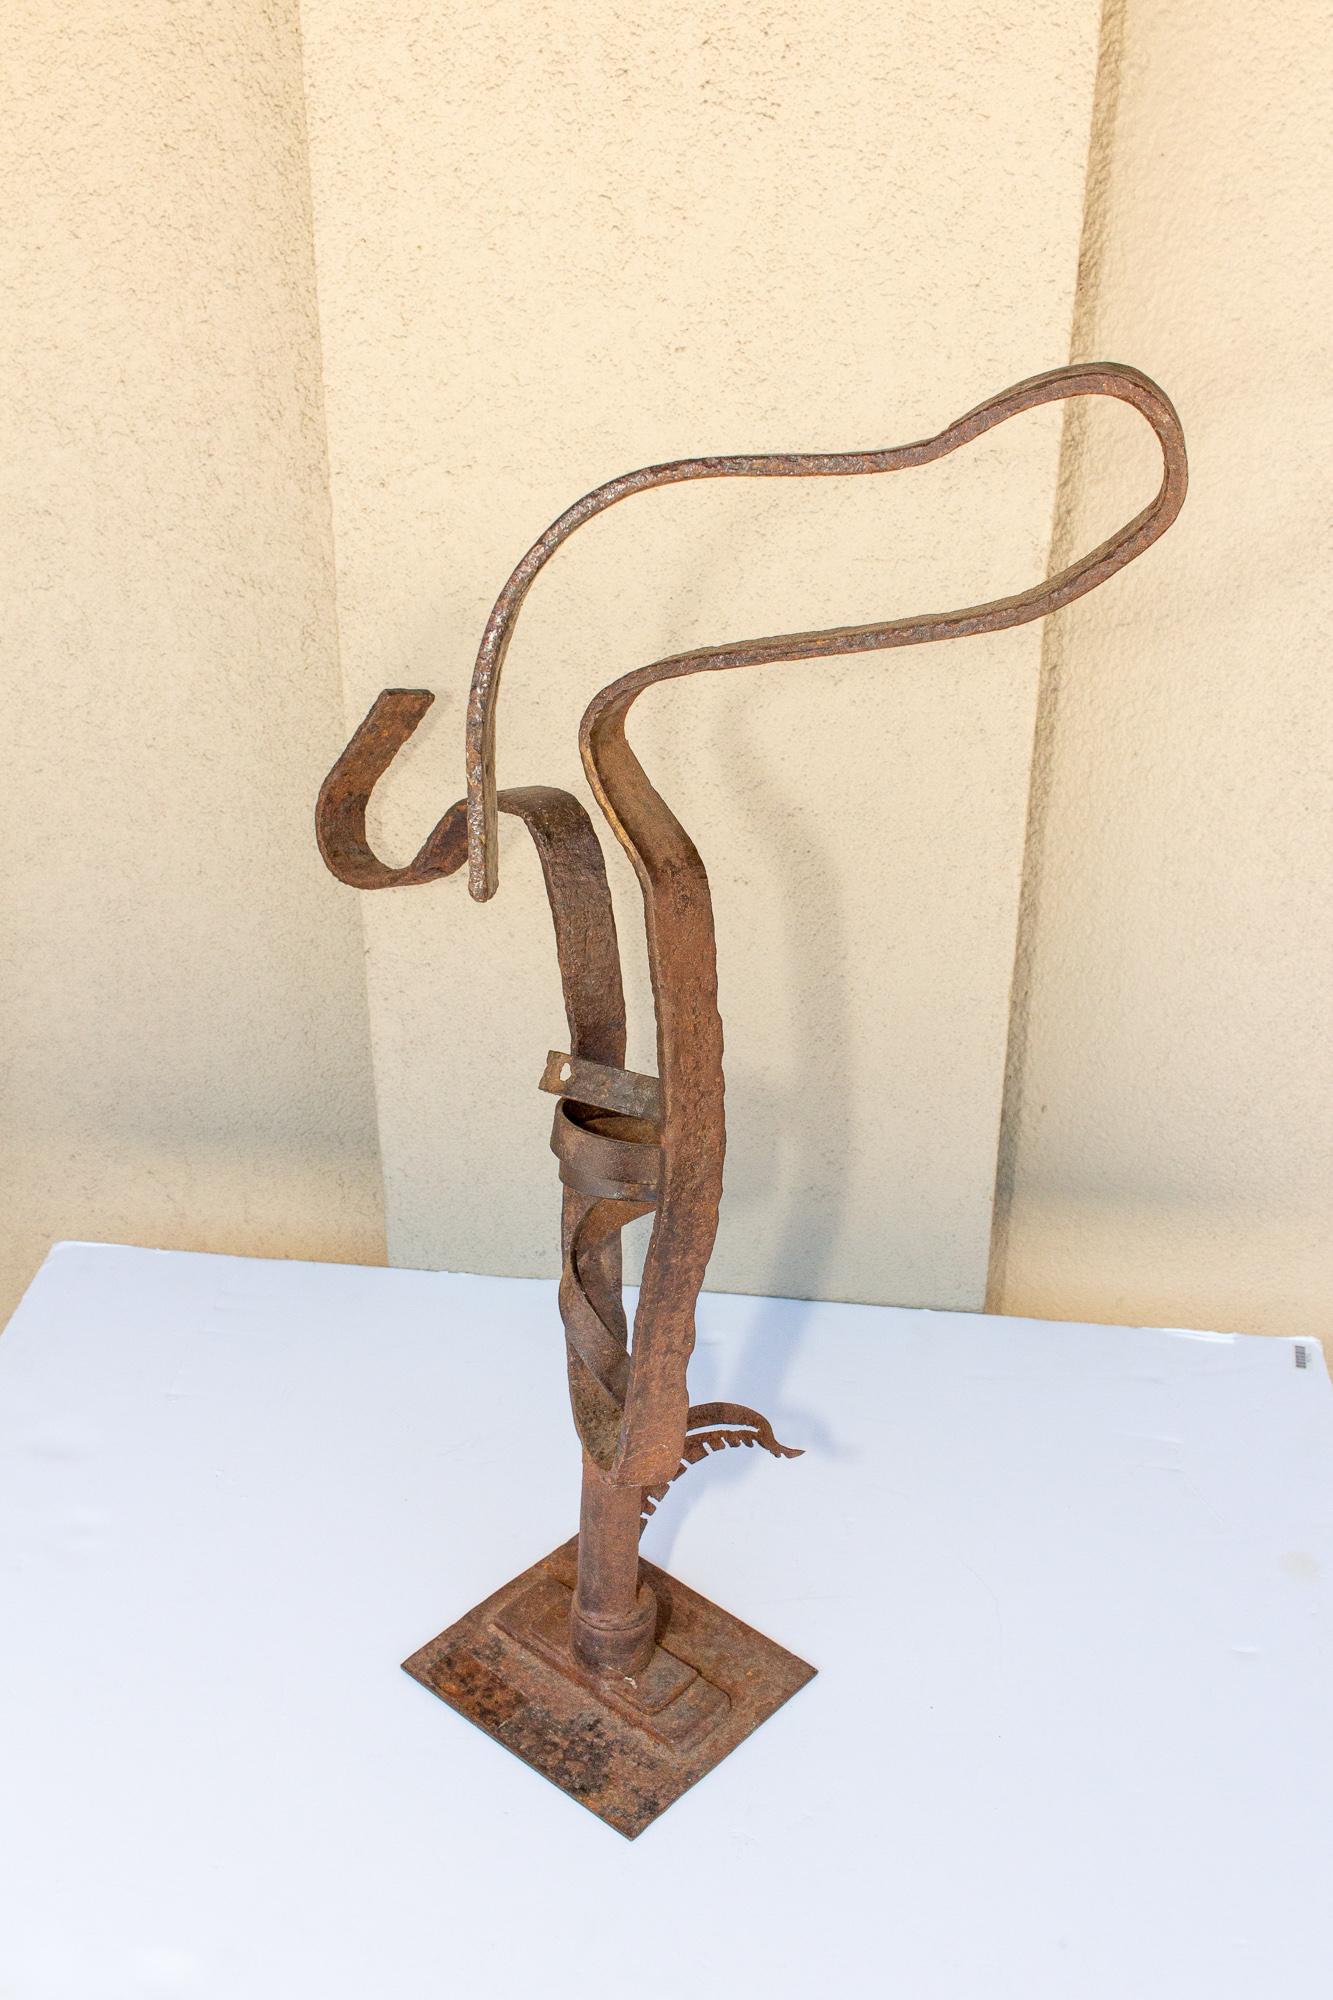 Midcentury Abstract Iron Sculpture found in France 2